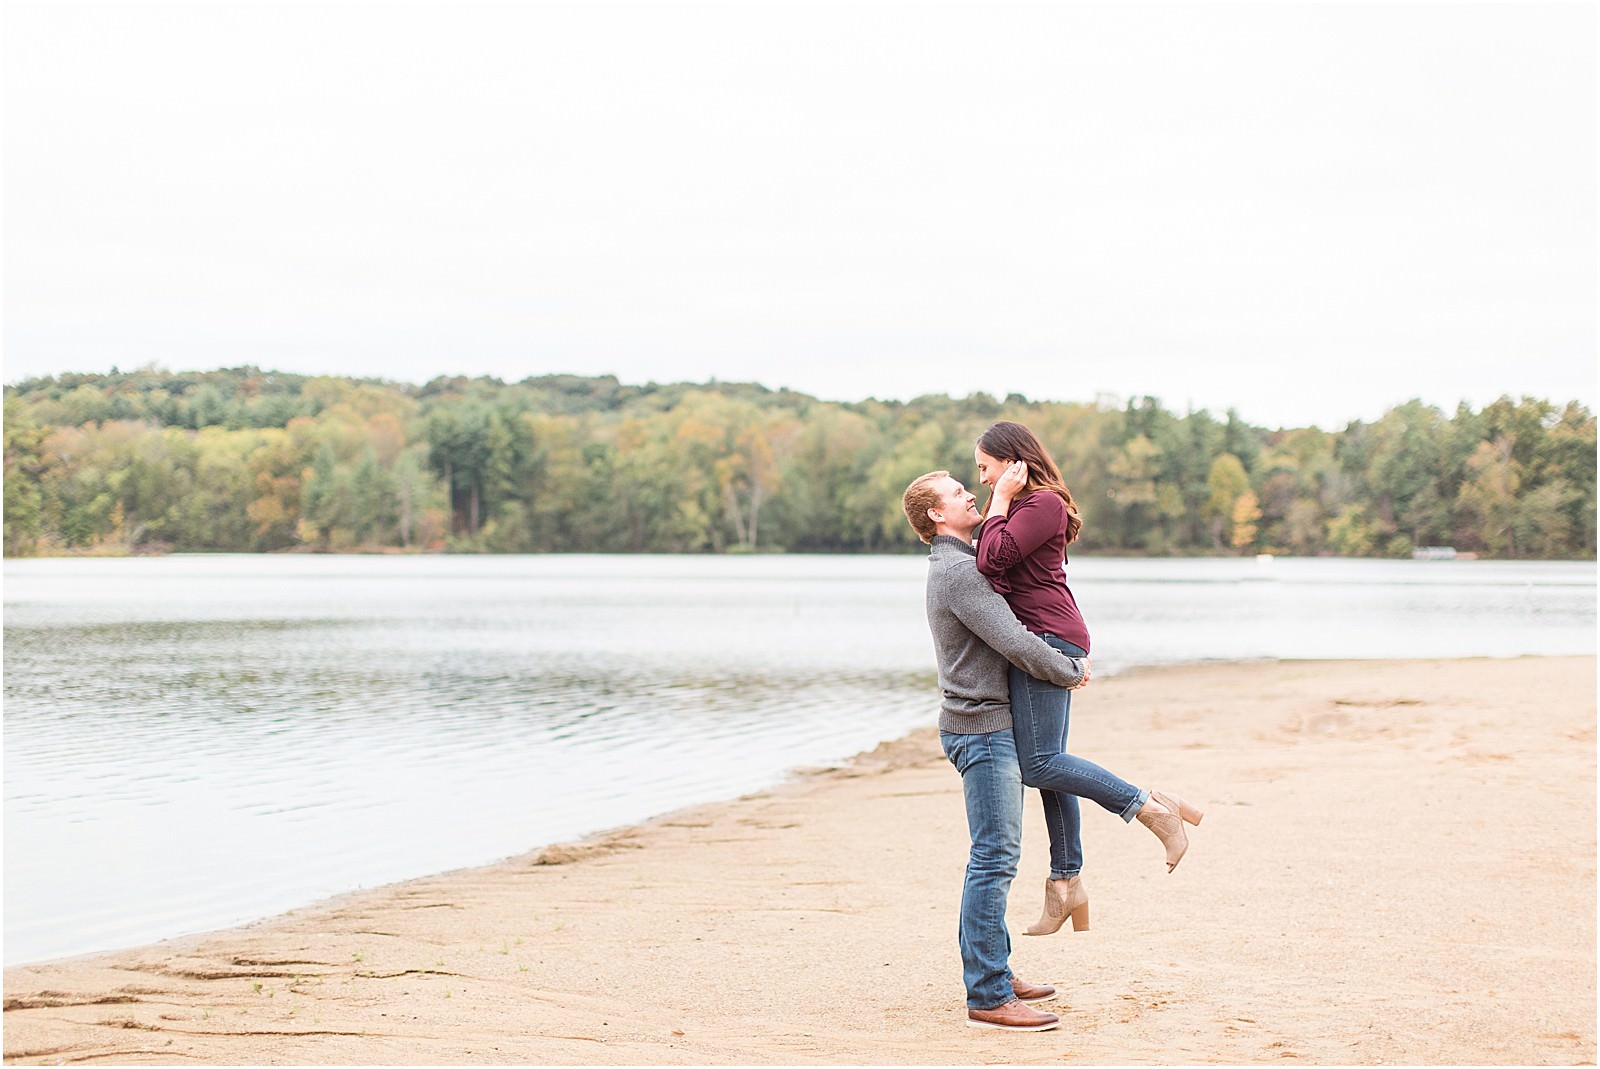 A Lincoln State Park Engagemtent Session | Deidra and Andrew | Bret and Brandie Photography 0026.jpg